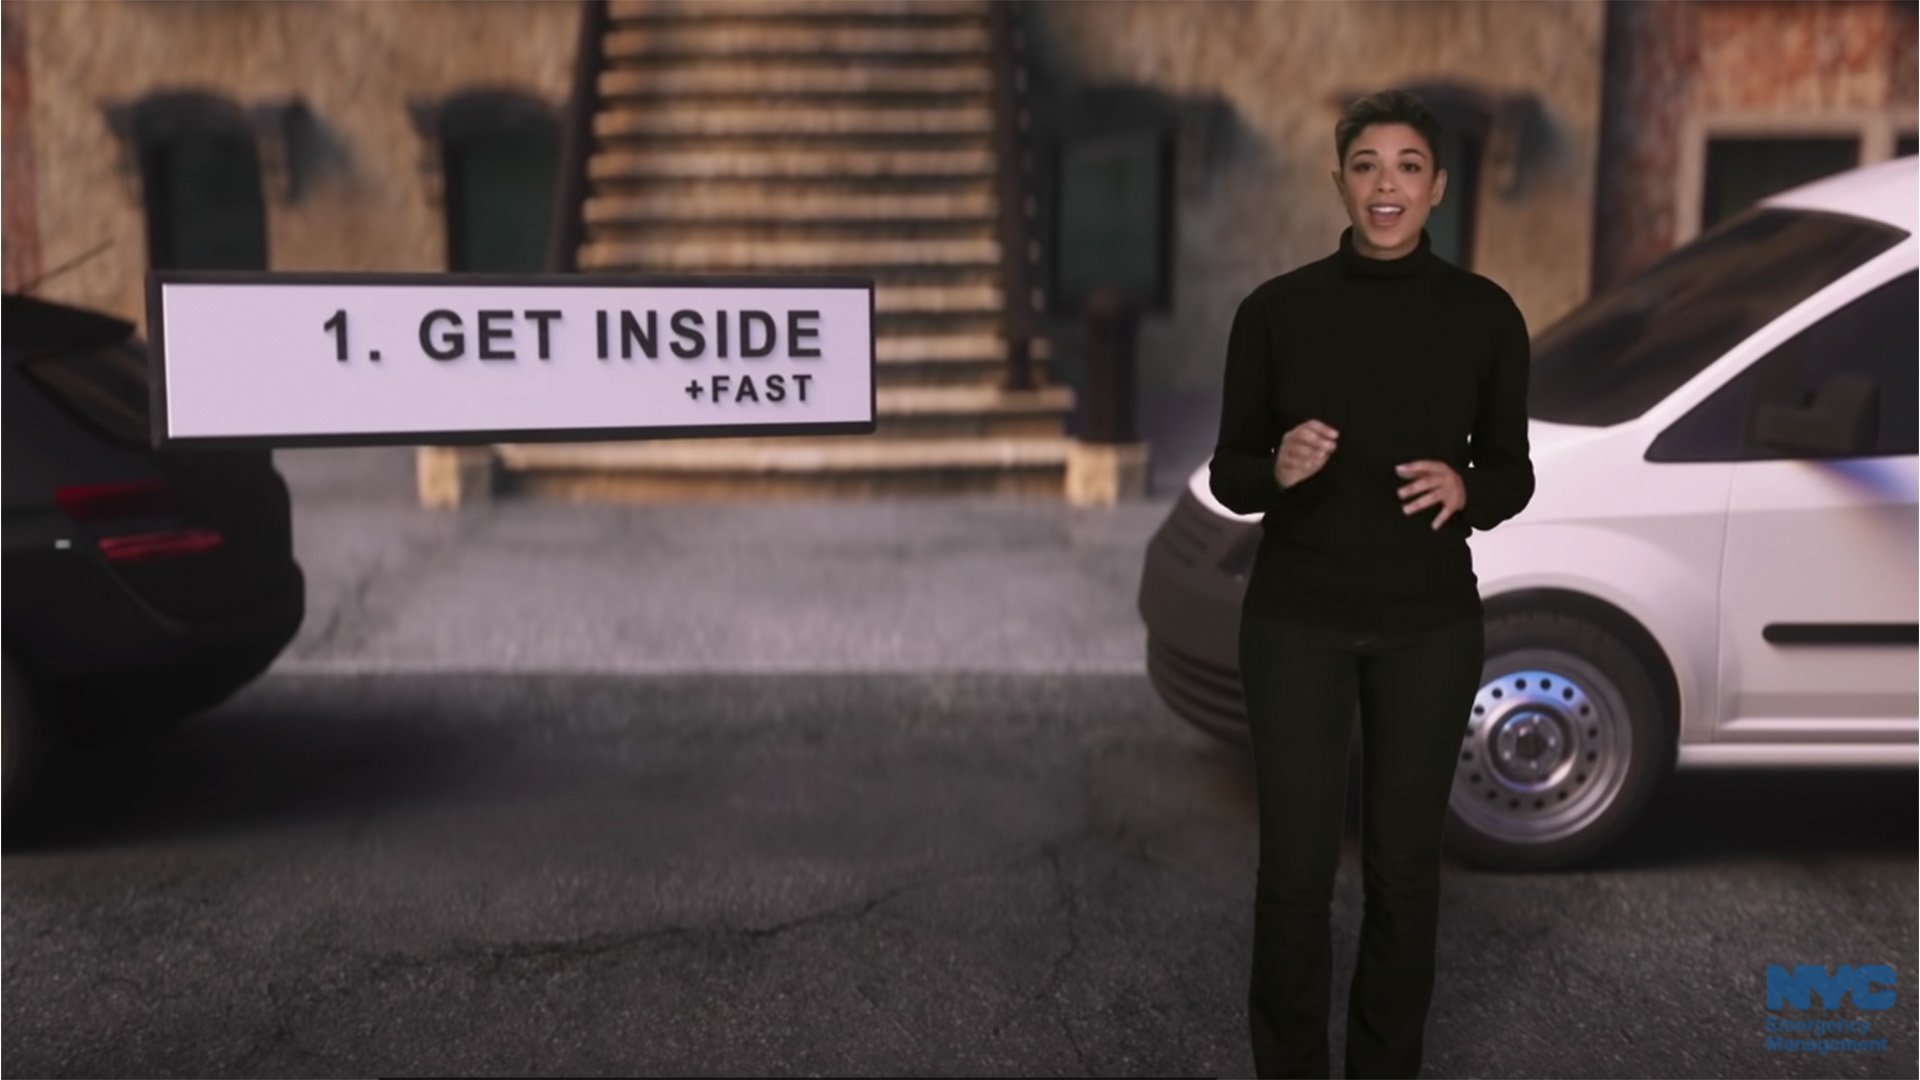 "Get Inside — Fast." Gee, thanks for that. I often forget to move quickly and seek shelter in times of extreme crisis. Screenshot from NYC Nuclear Preparedness PSA/YouTube. 